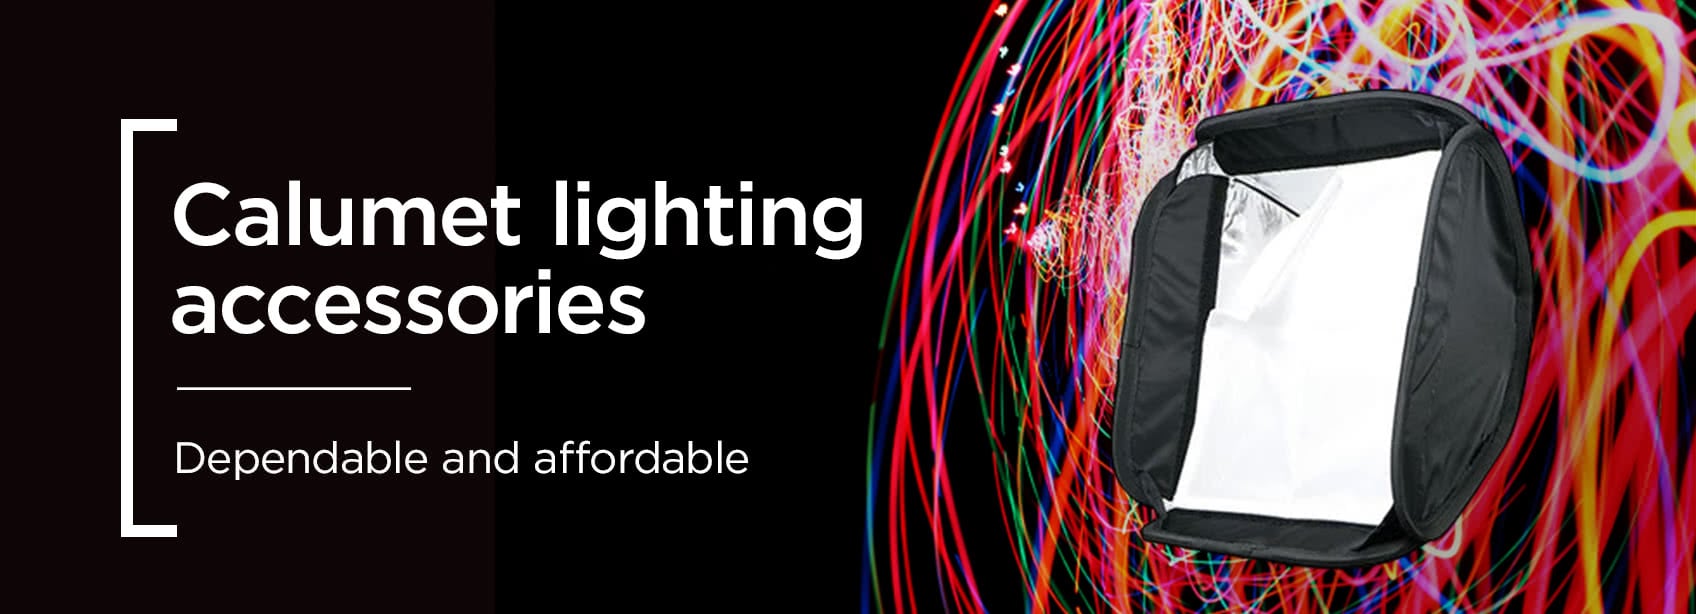 Calumet Lighting Products - Dependable and affordable